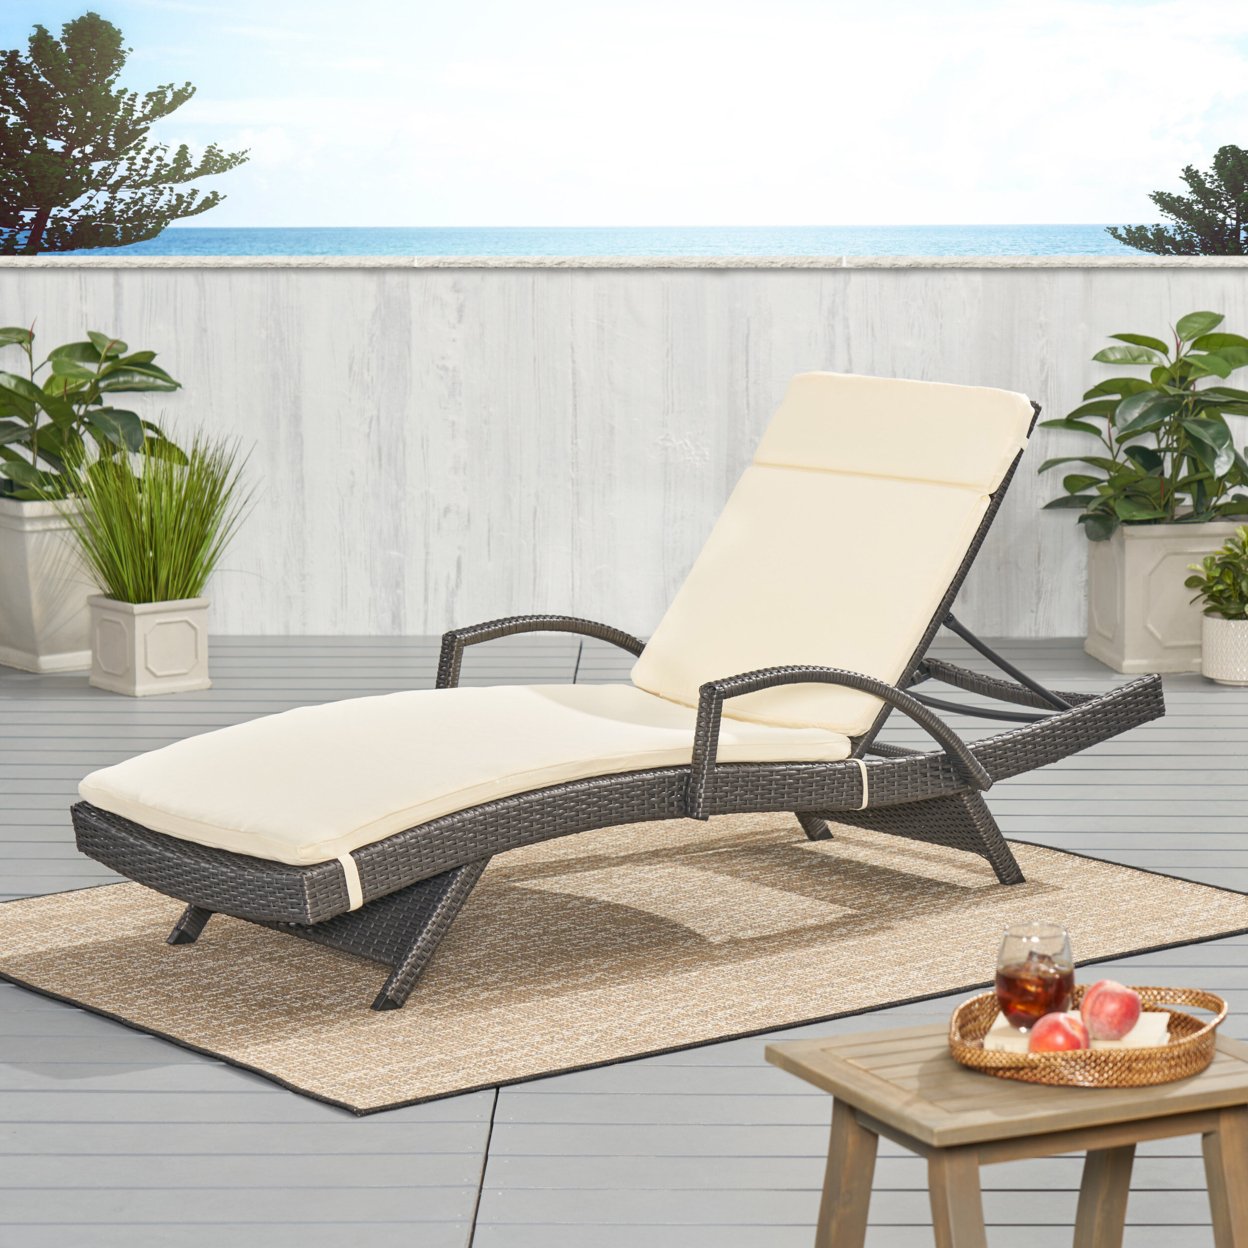 Soleil Outdoor Water Resistant Chaise Lounge Cushion - Beige